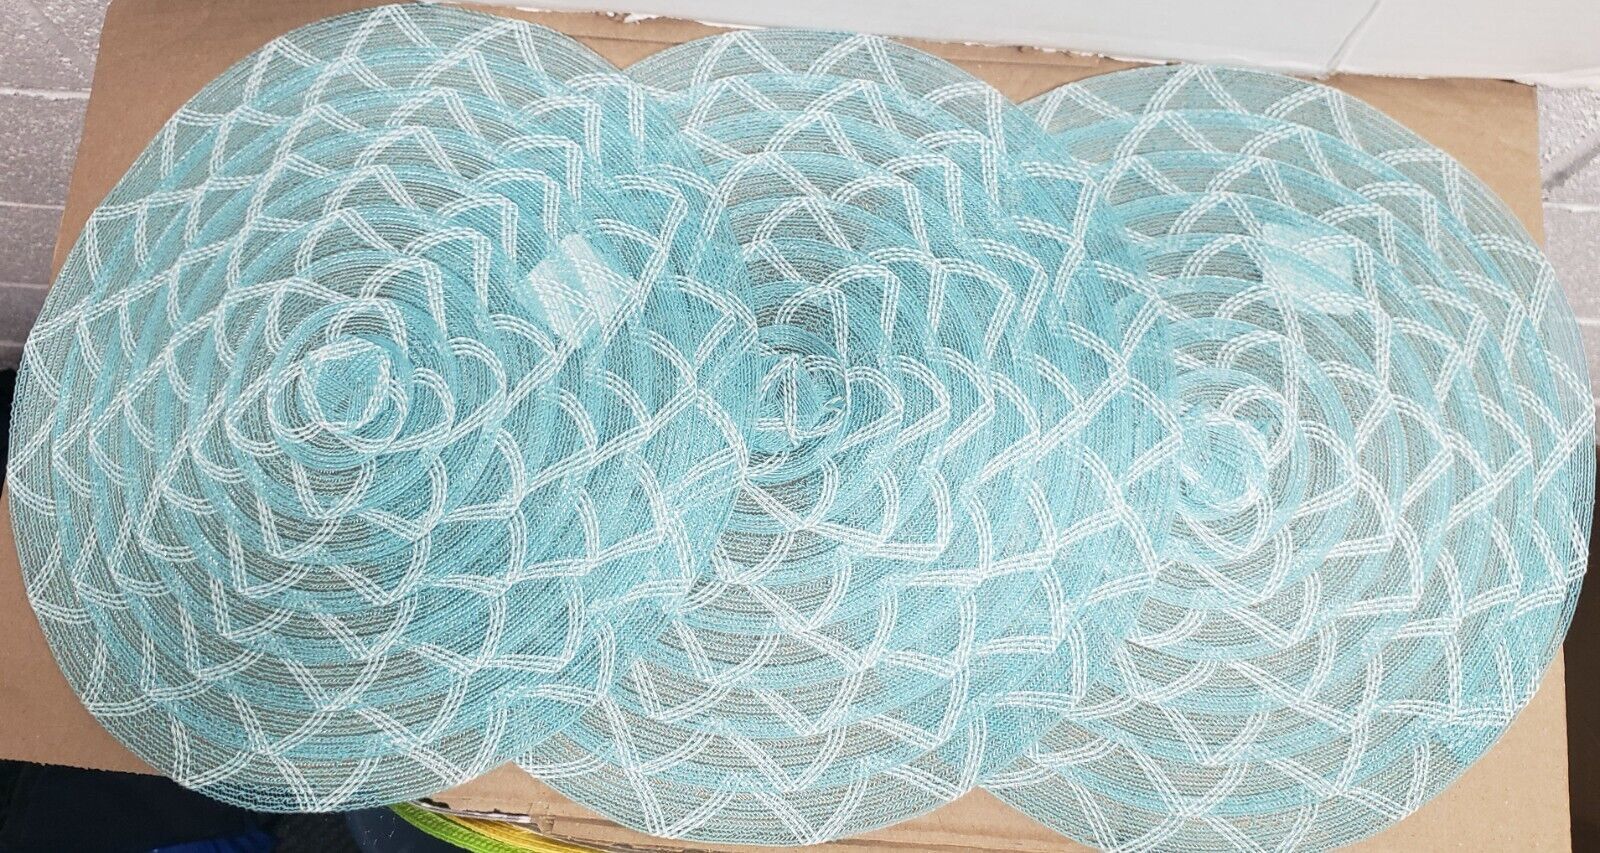 Primary image for Set of 3 Same Lace Round Woven Polypropylene Placemats(appr.15")AQUA BLUE DESIGN